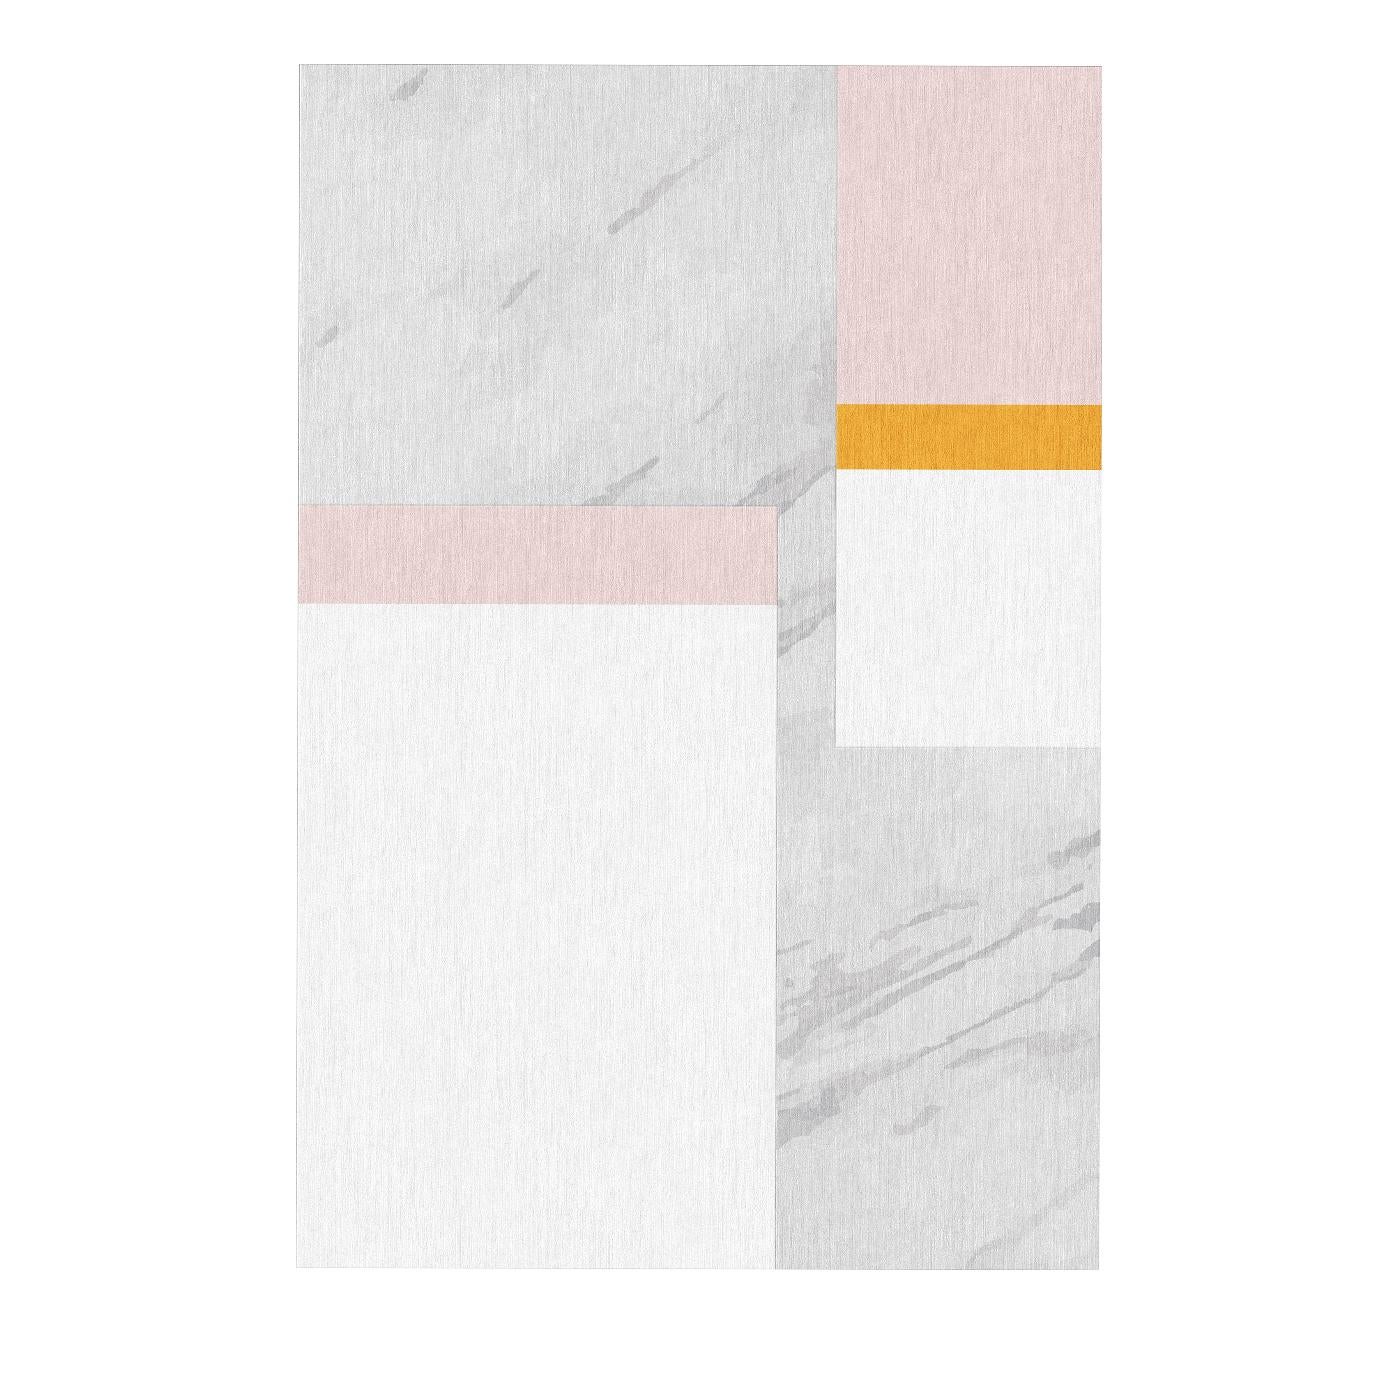 Evoking the refined simplicity of Piet Mondrian's abstract grid compositions, this stunning rug will infuse any decor with timeless allure and unmistakable elegance. A captivating dance of colors and basic form, the piece features a vibrant color